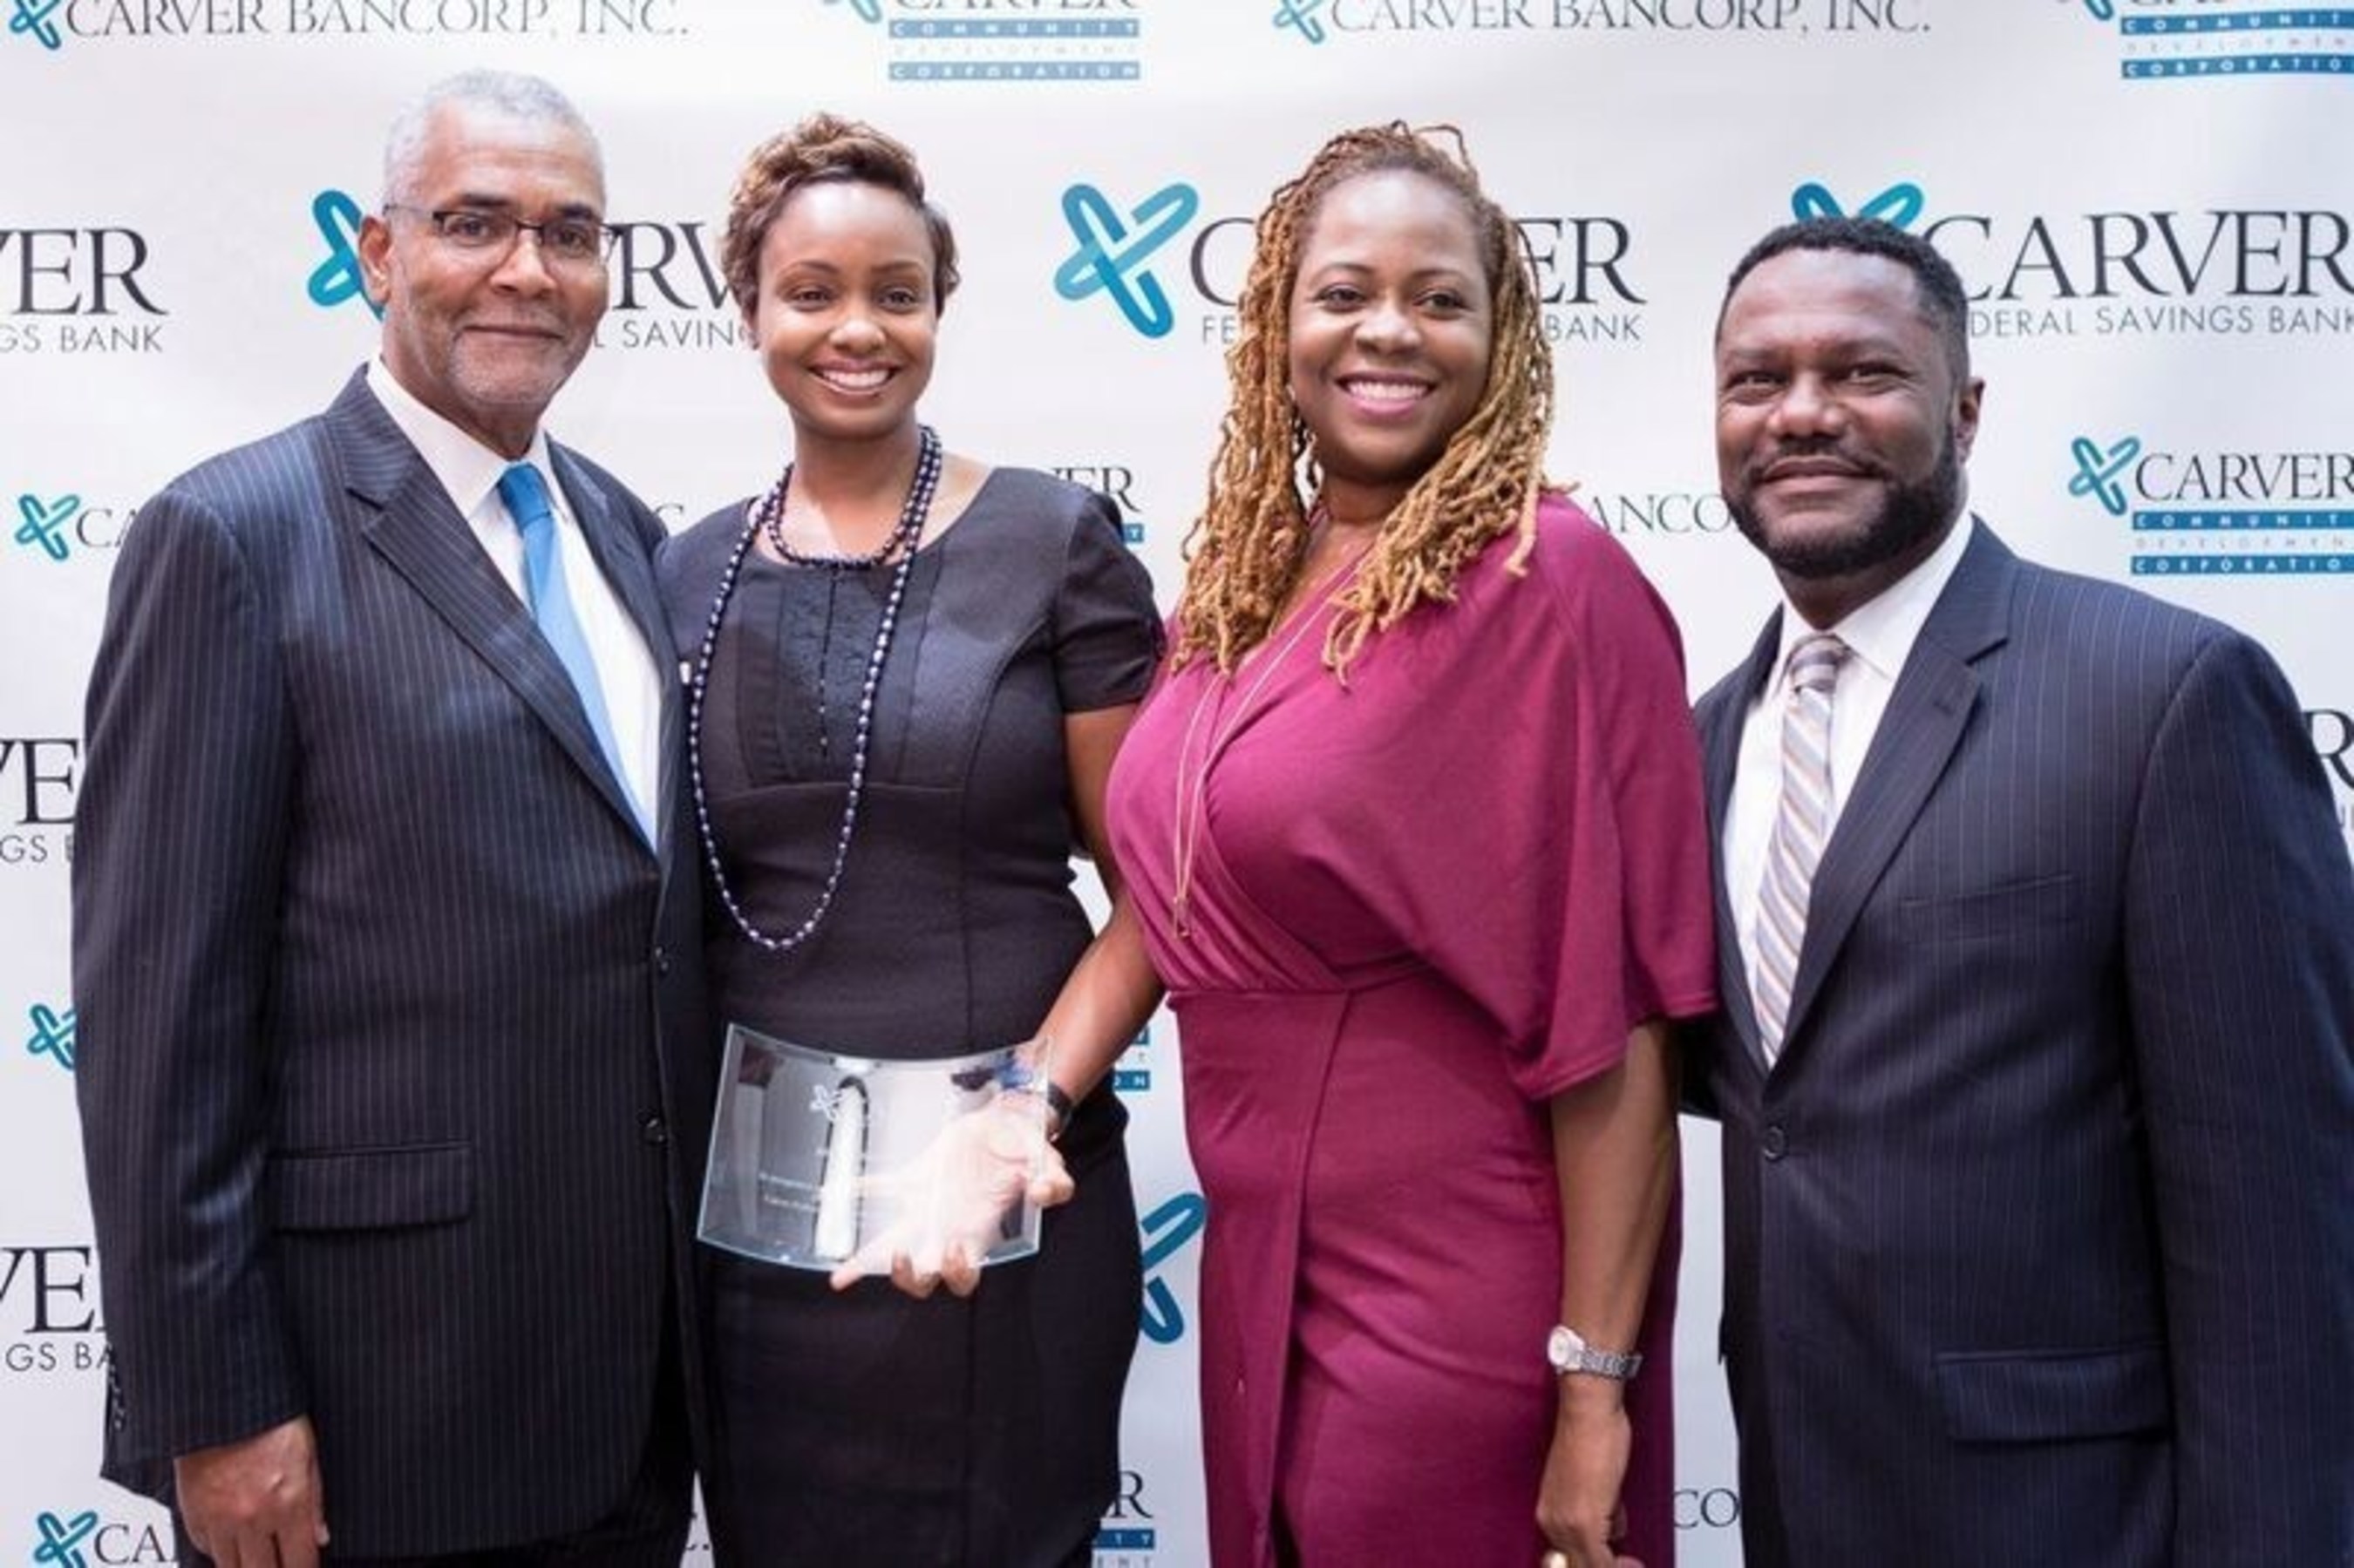 From left to right: Kenneth Knuckles, Carver Board of Directors, and President & CEO, Upper Manhattan Empowerment Zone, Aliyyah Baylor, Make My Cake; Blondel Pinnock SVP, Chief Lending Officer, Carver Federal Savings Bank; Michael T. Pugh, President & CEO, Carver Federal Savings Bank